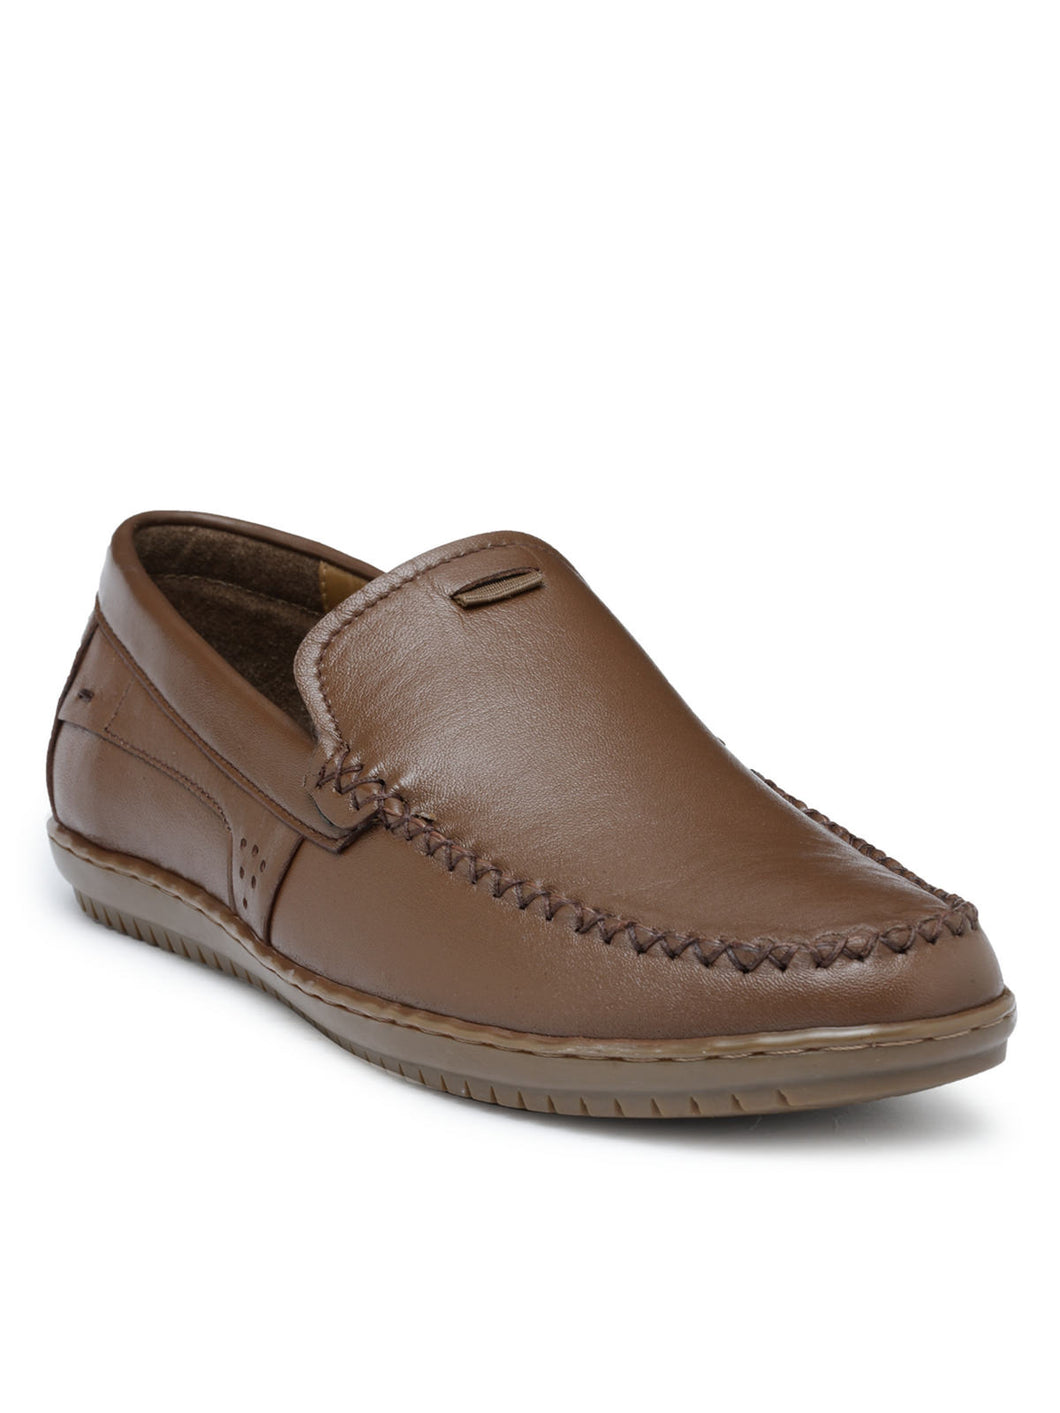 Teakwood Leather Tan Casual Shoes